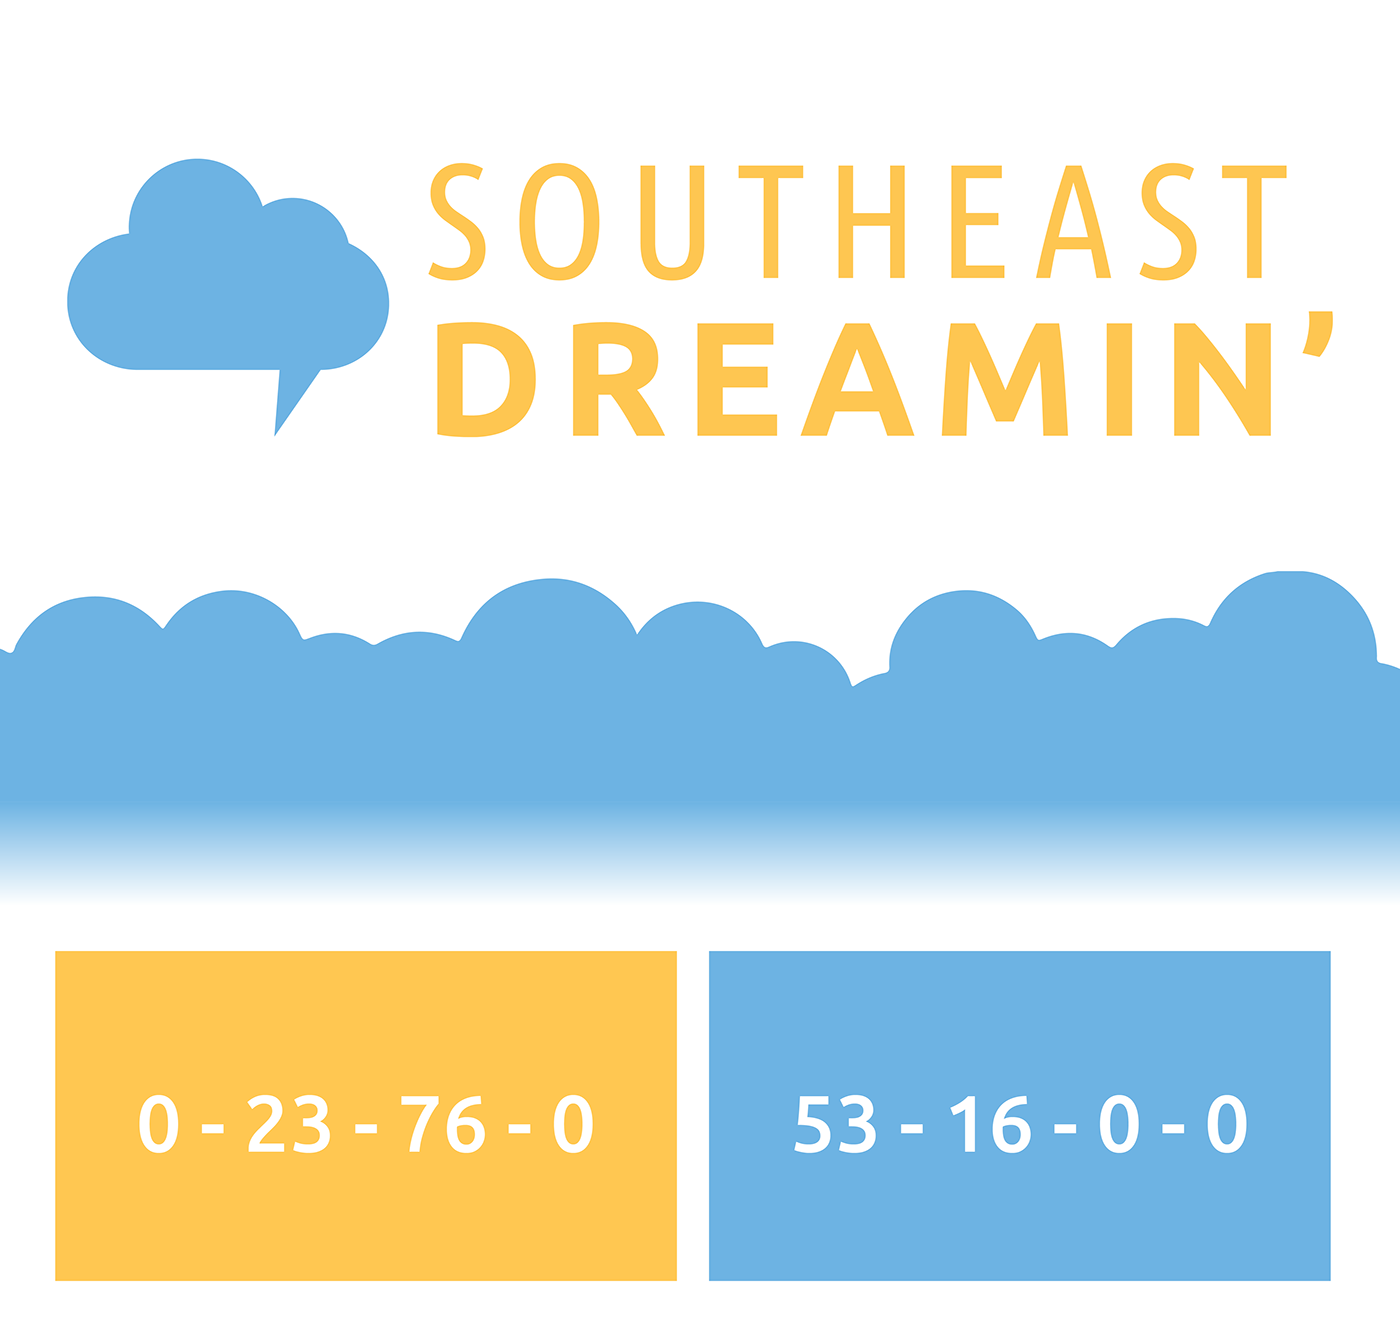 conference branding southeast dreamin Salesforce usergroups